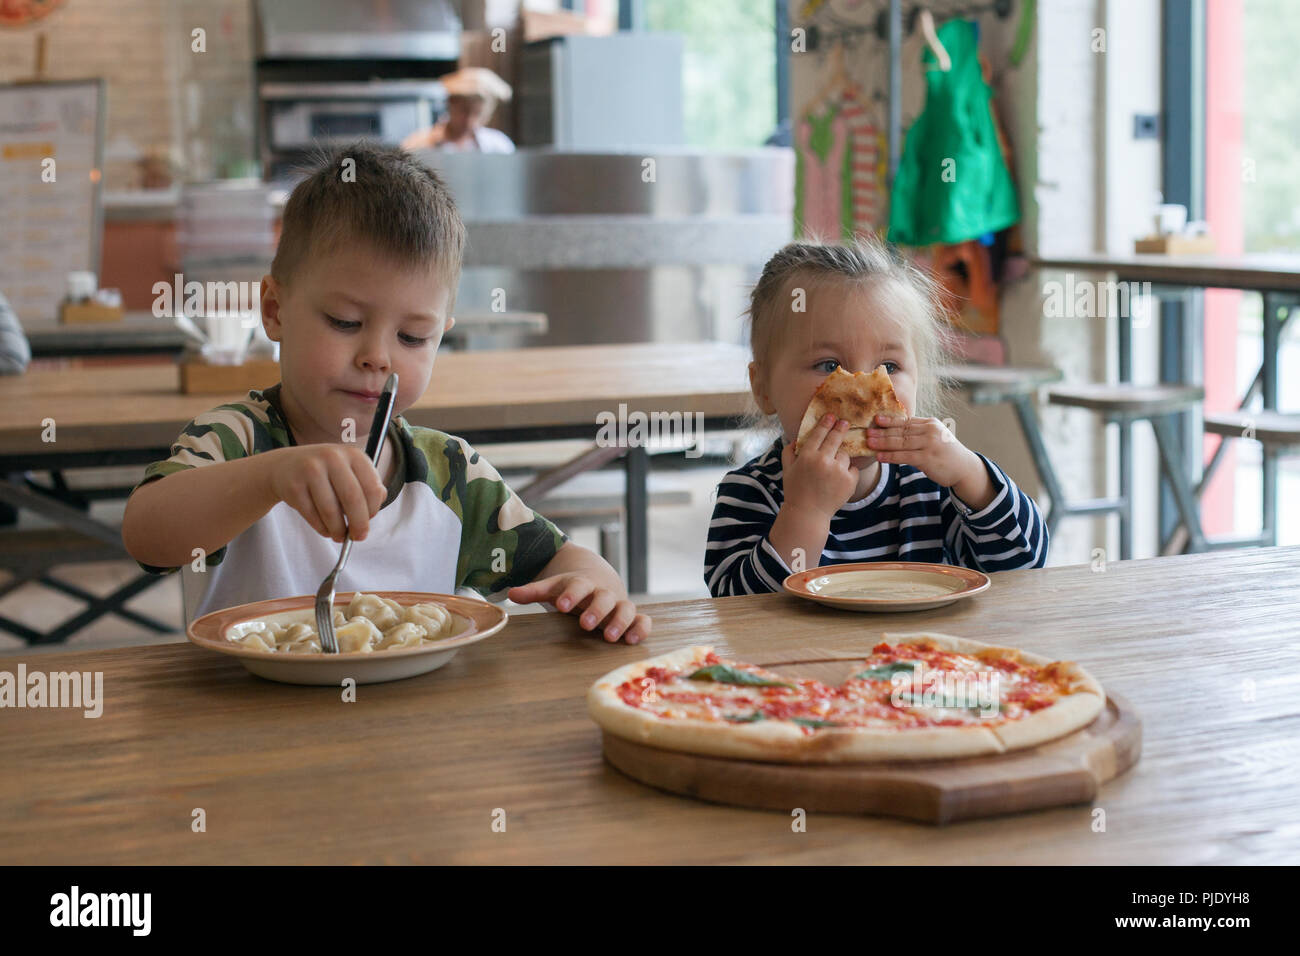 kids eat pizza and meat dumplings at cafe. children eating unhealthy food indoors. Siblings in the cafe, family holiday concept. Stock Photo